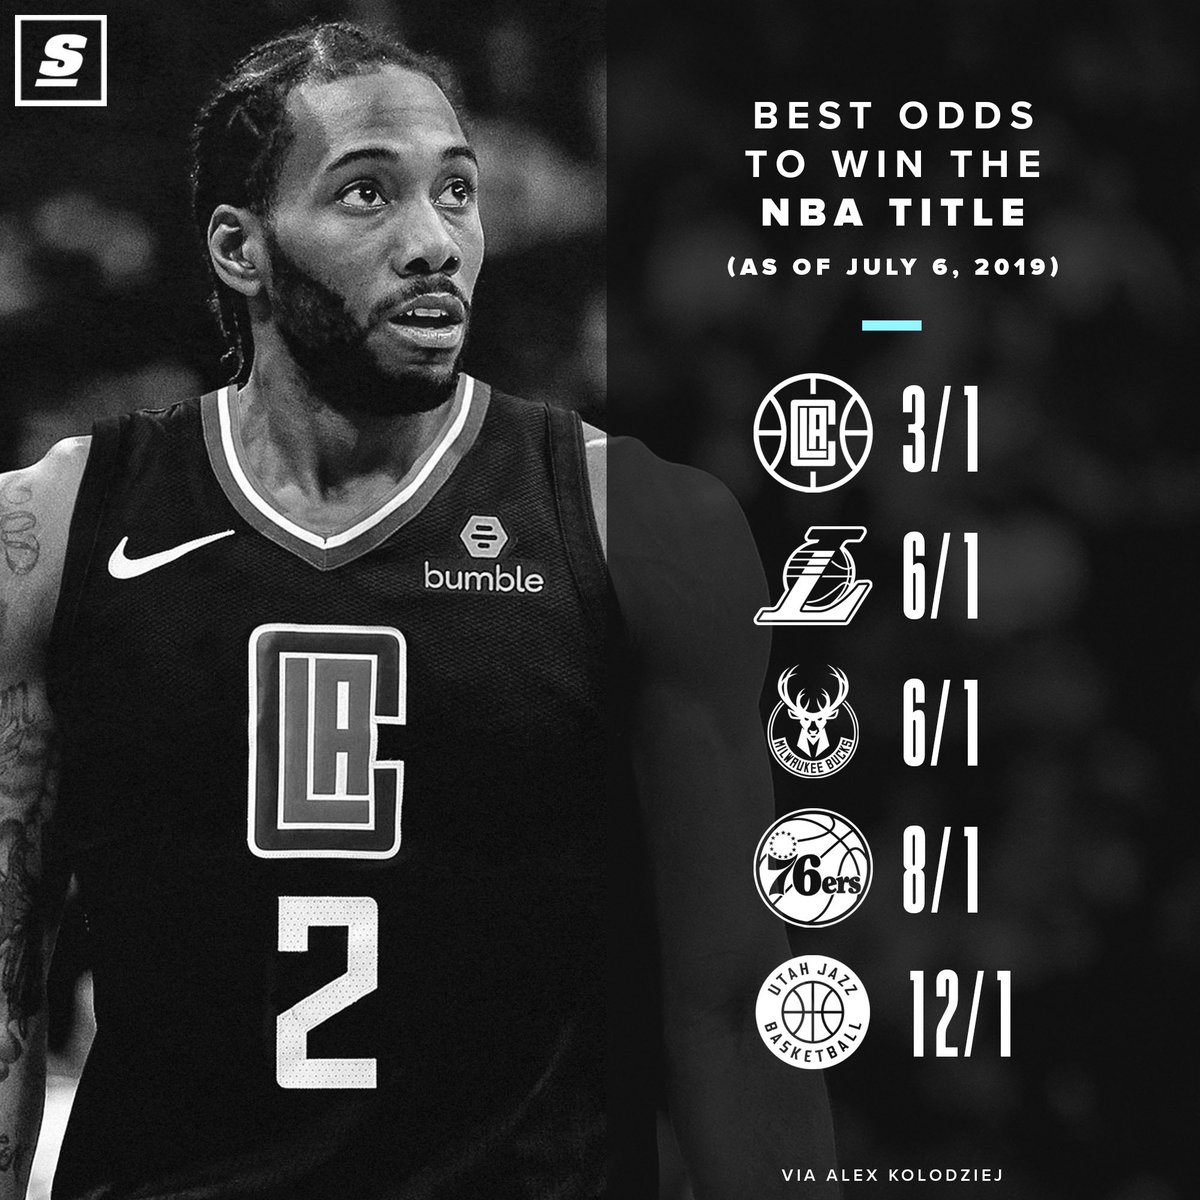 Clippers: Kawhi, PG and the Clippers are now the squad to beat